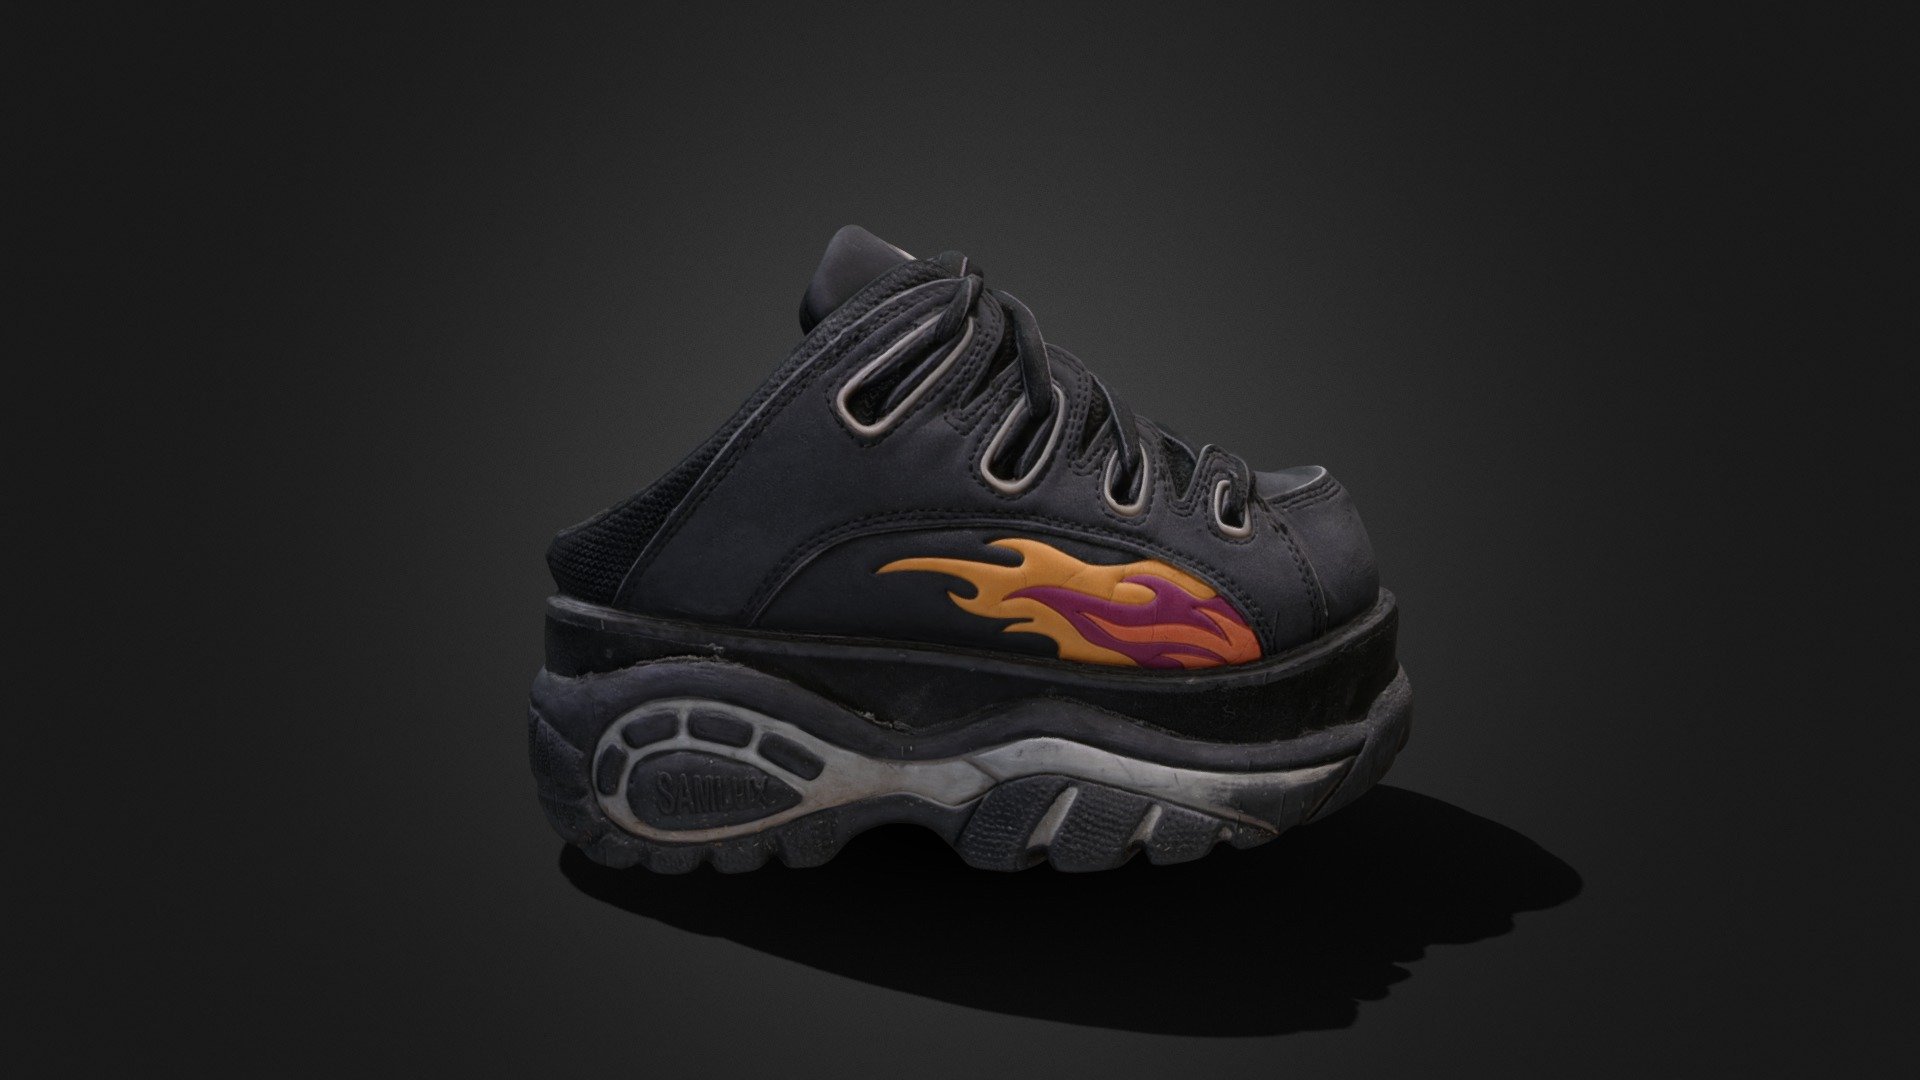 Samlux platform trainers from the 2000s 3d model